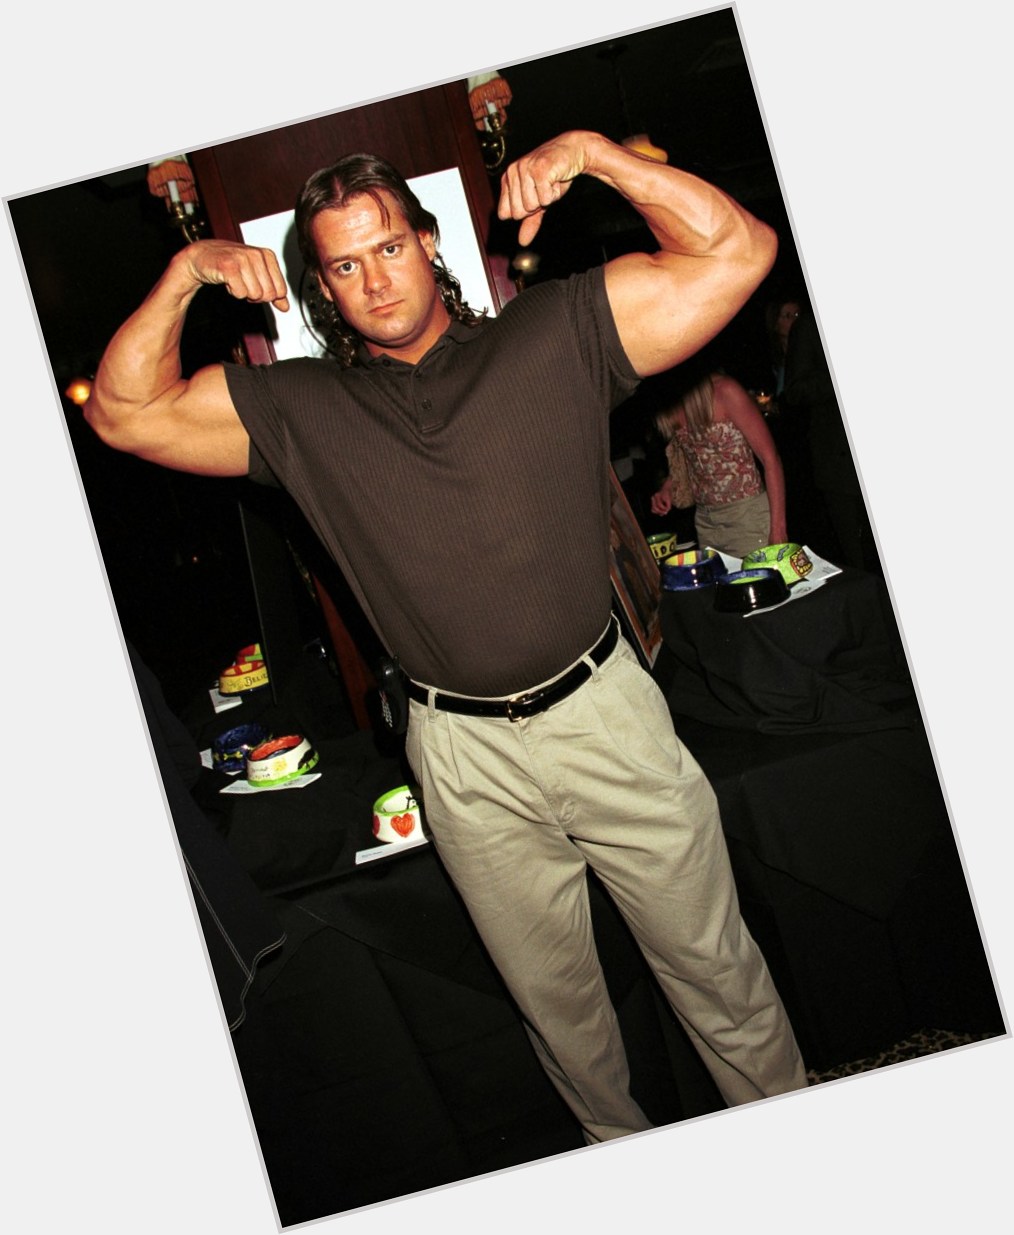 Https://fanpagepress.net/m/M/Mike Awesome Dating 2